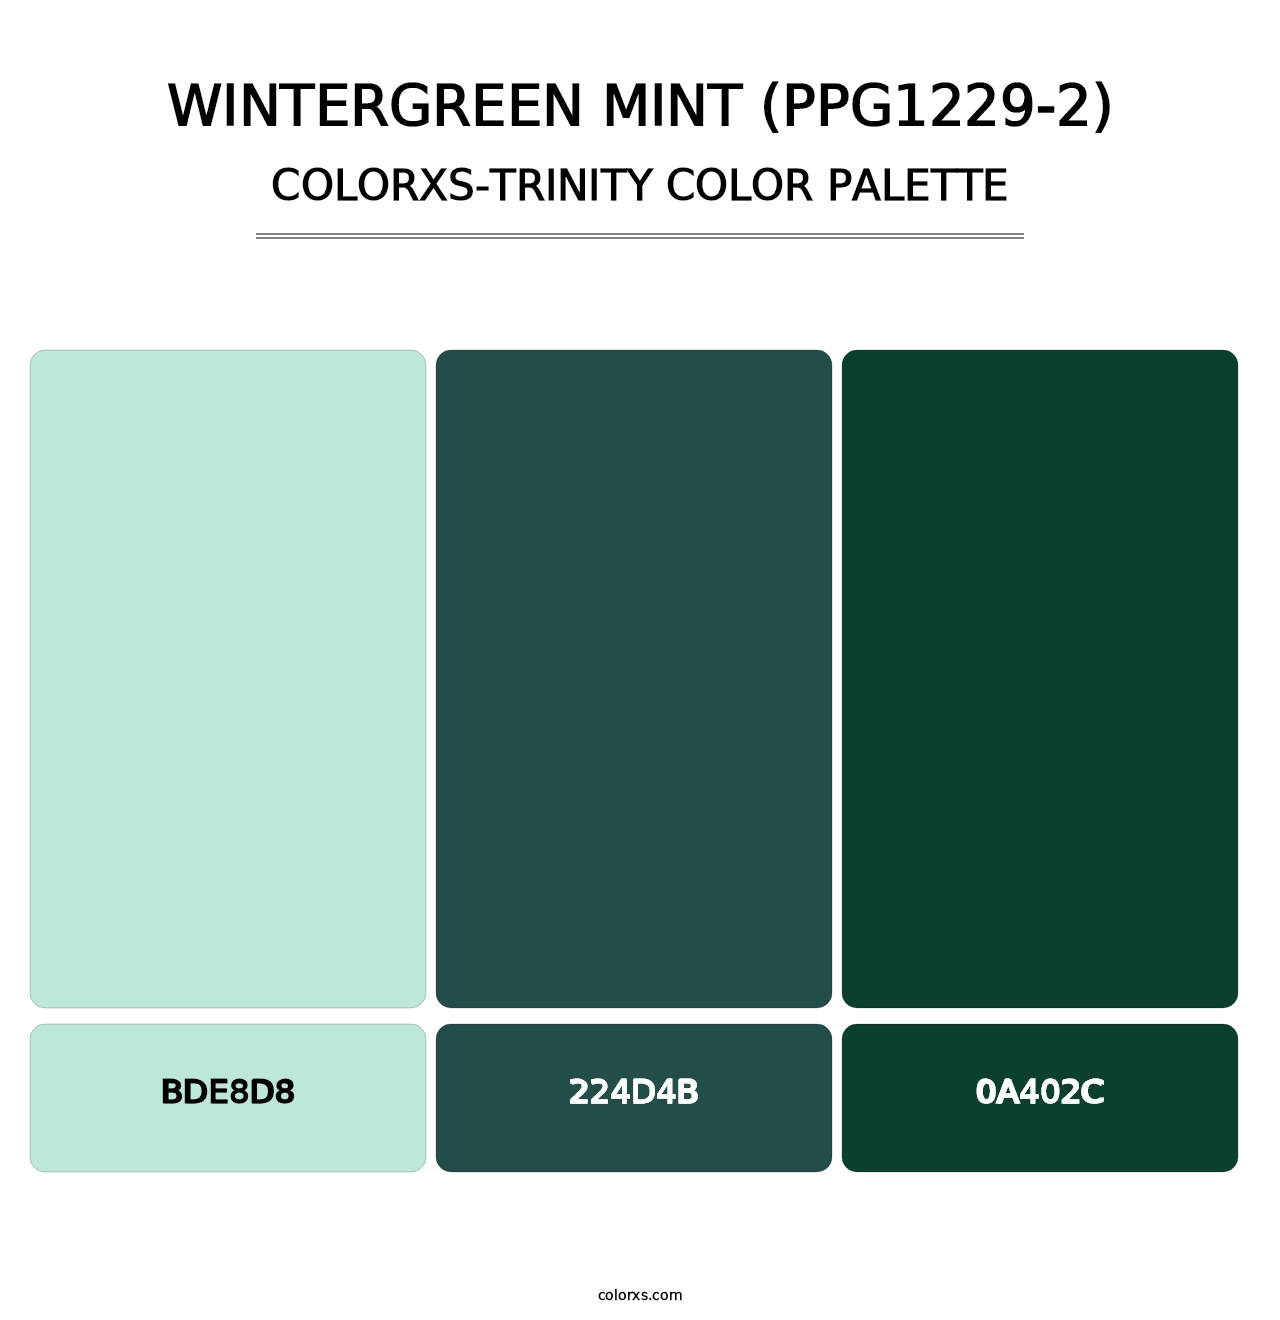 Wintergreen Mint (PPG1229-2) - Colorxs Trinity Palette